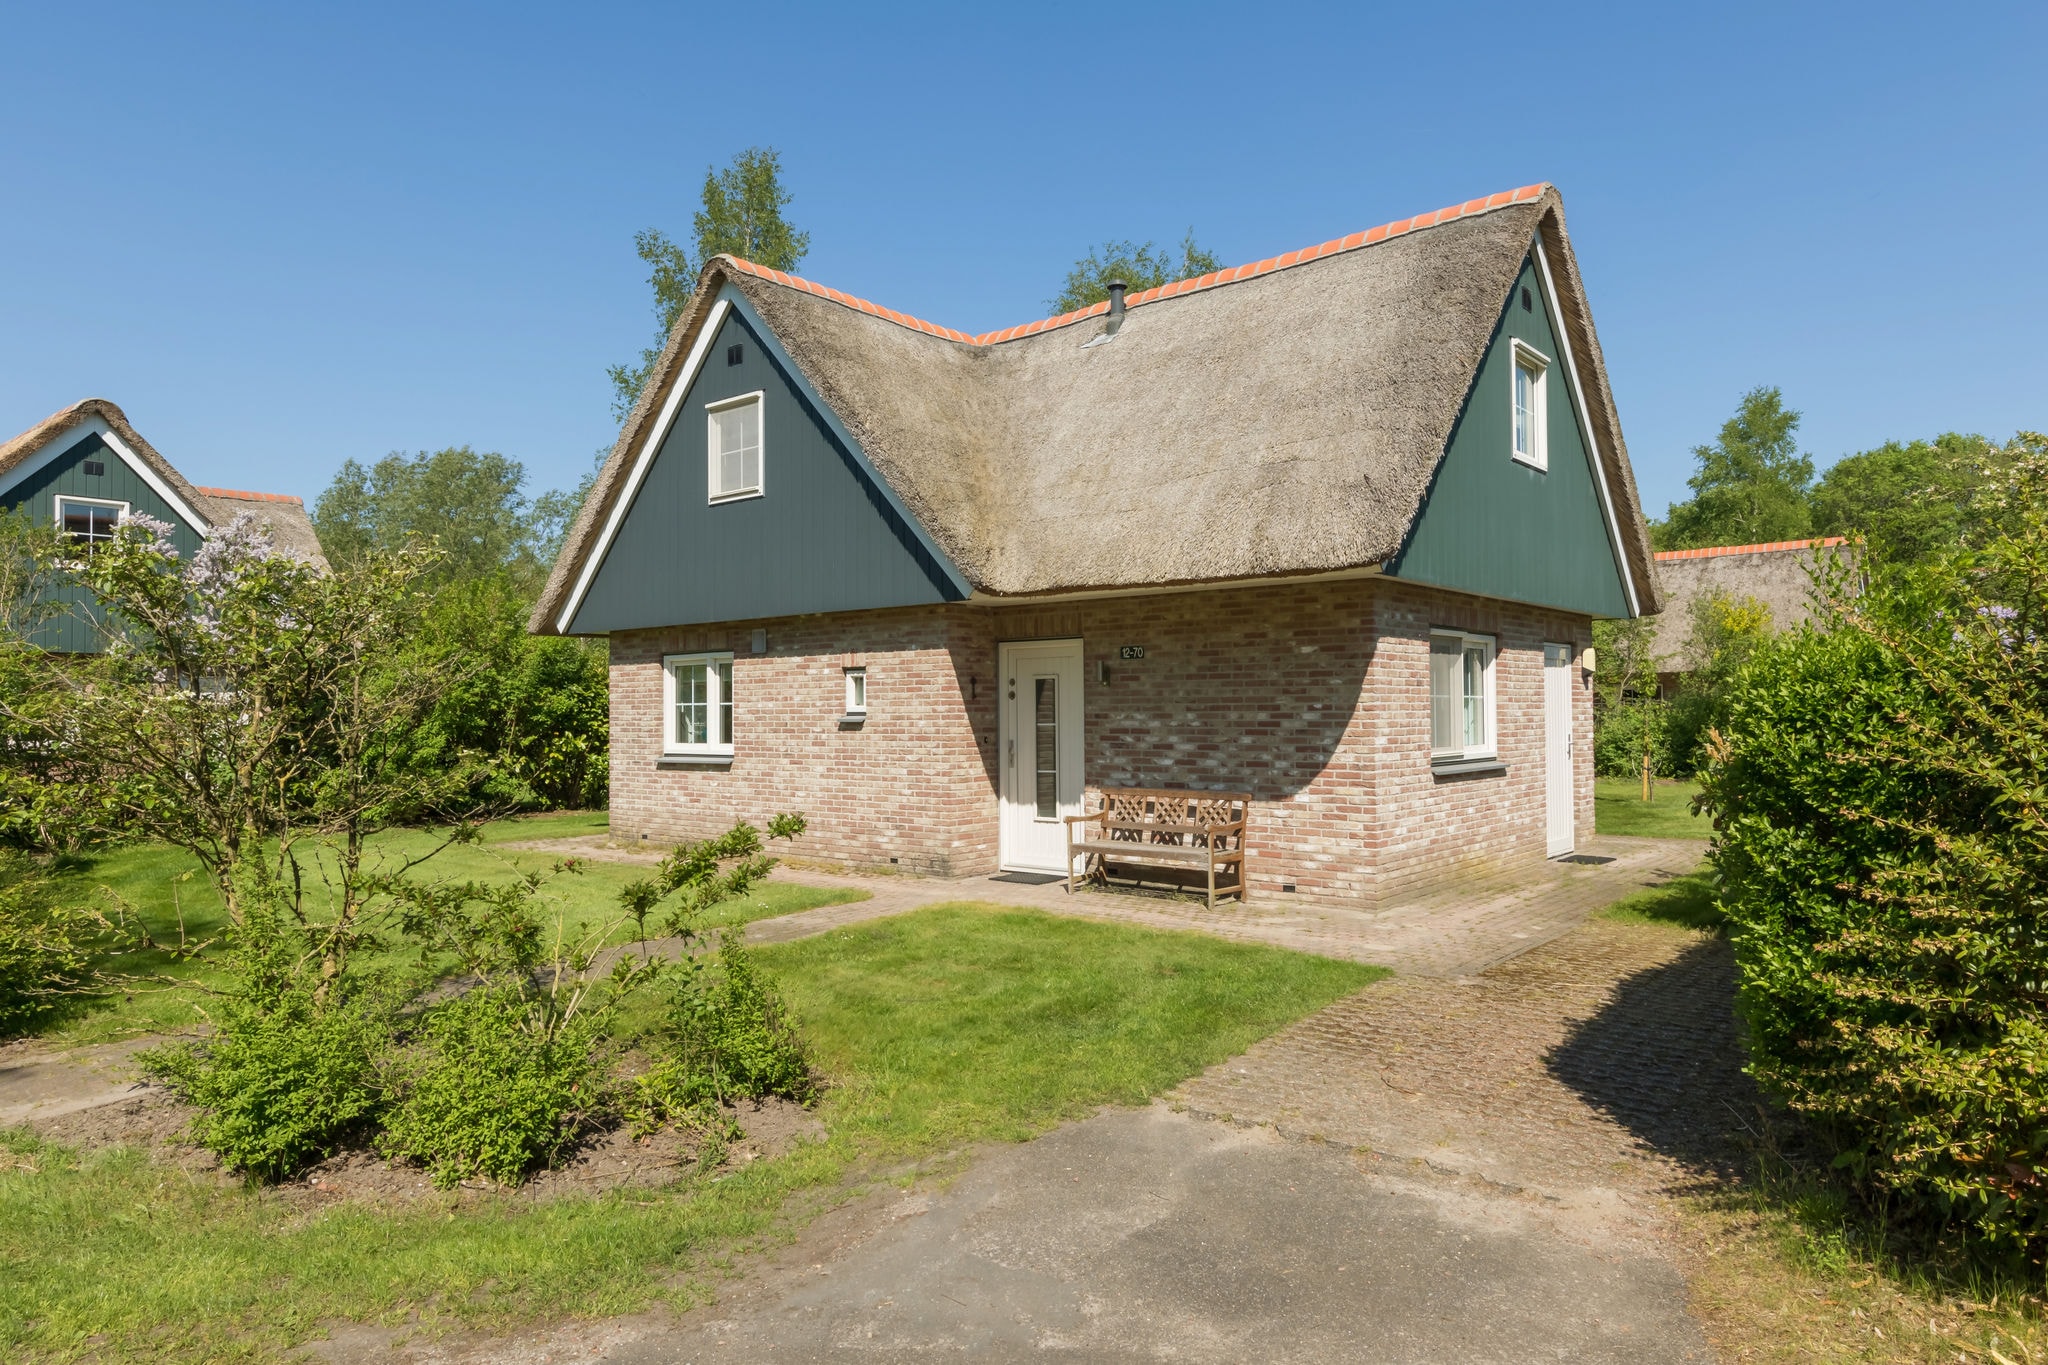 Great thatched villa with solarium, in a national park